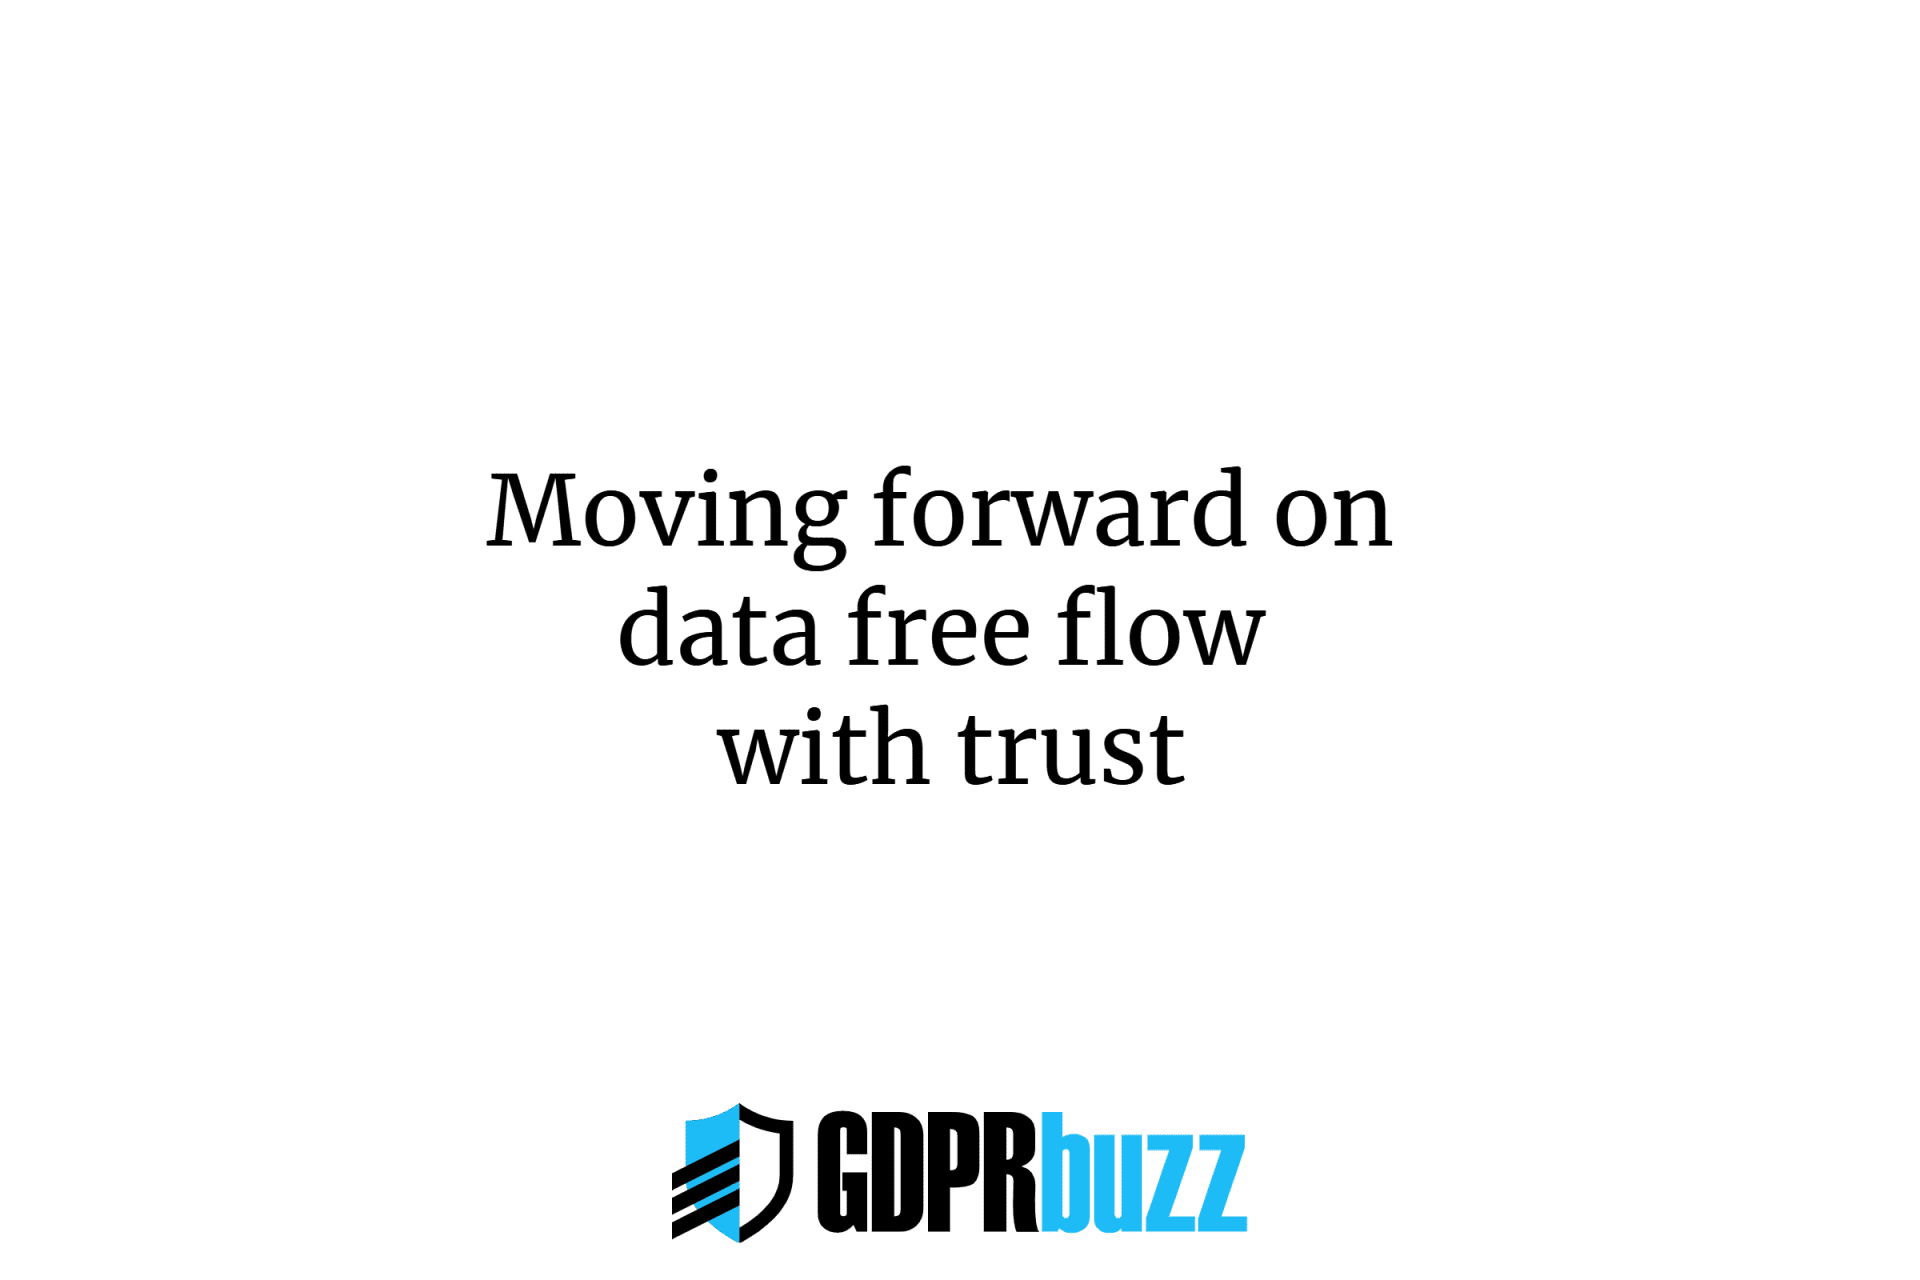 Moving forward on data free flow with trust